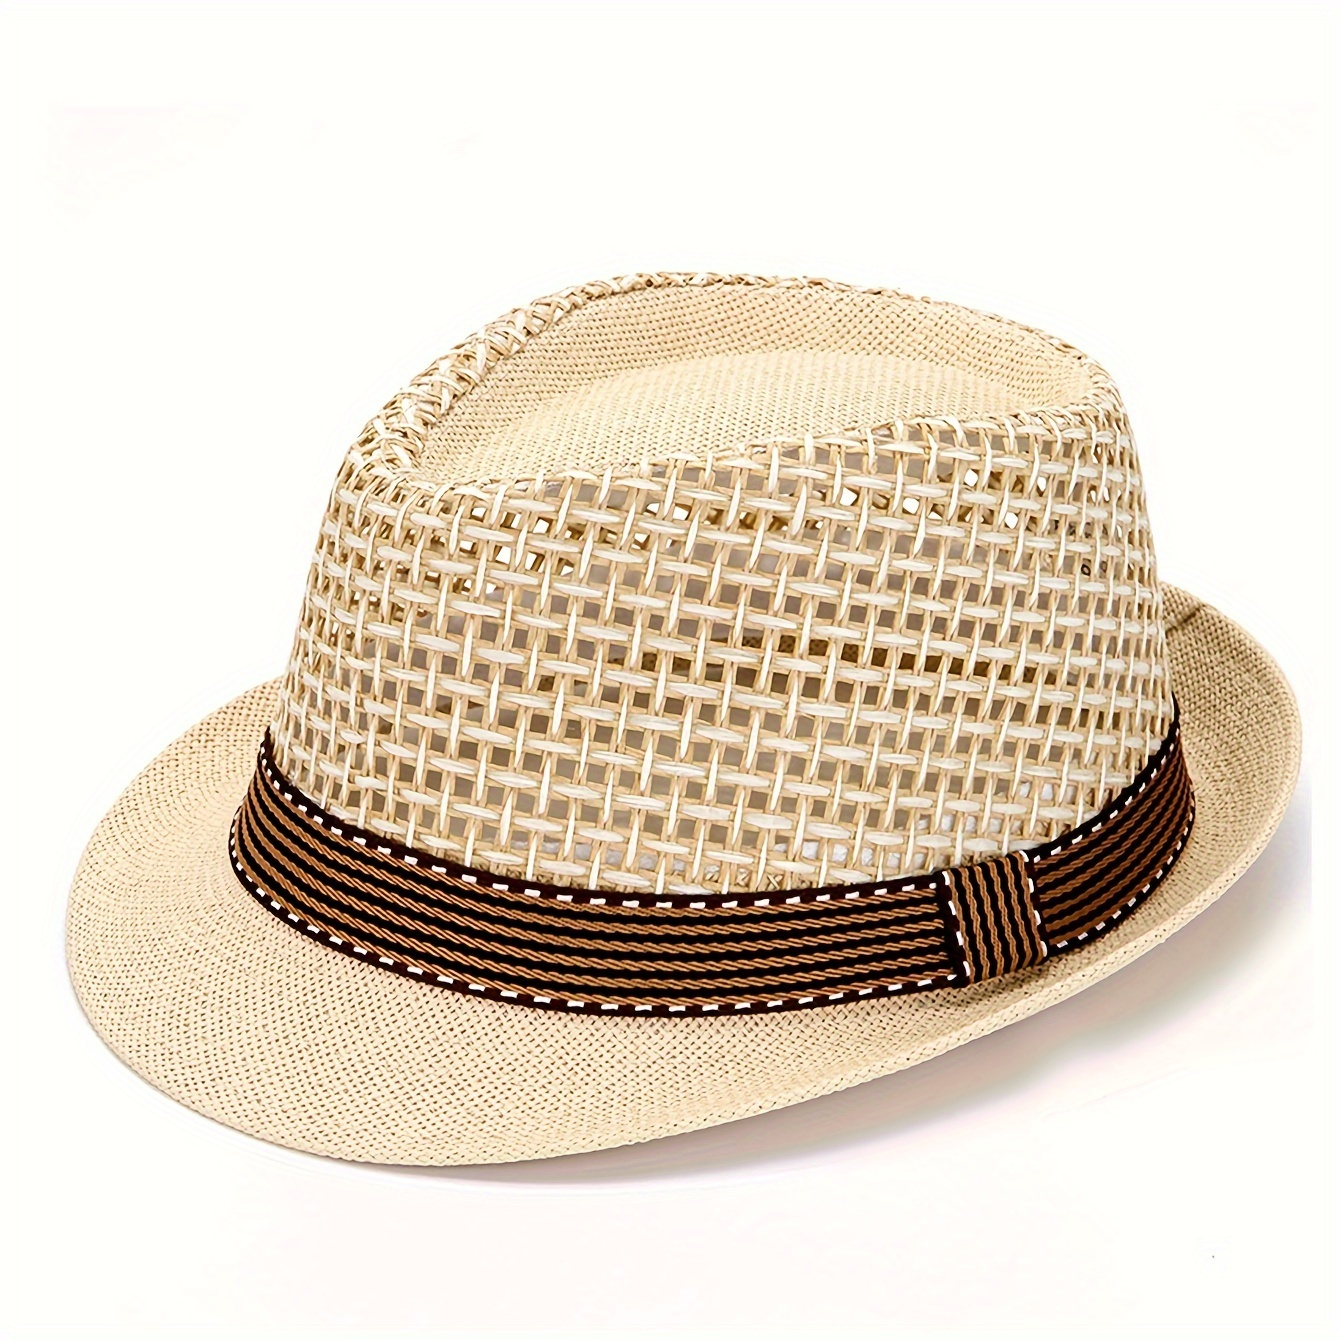 Stylish Mens Summer Hat With Mesh Design For Sun Protection Ideal